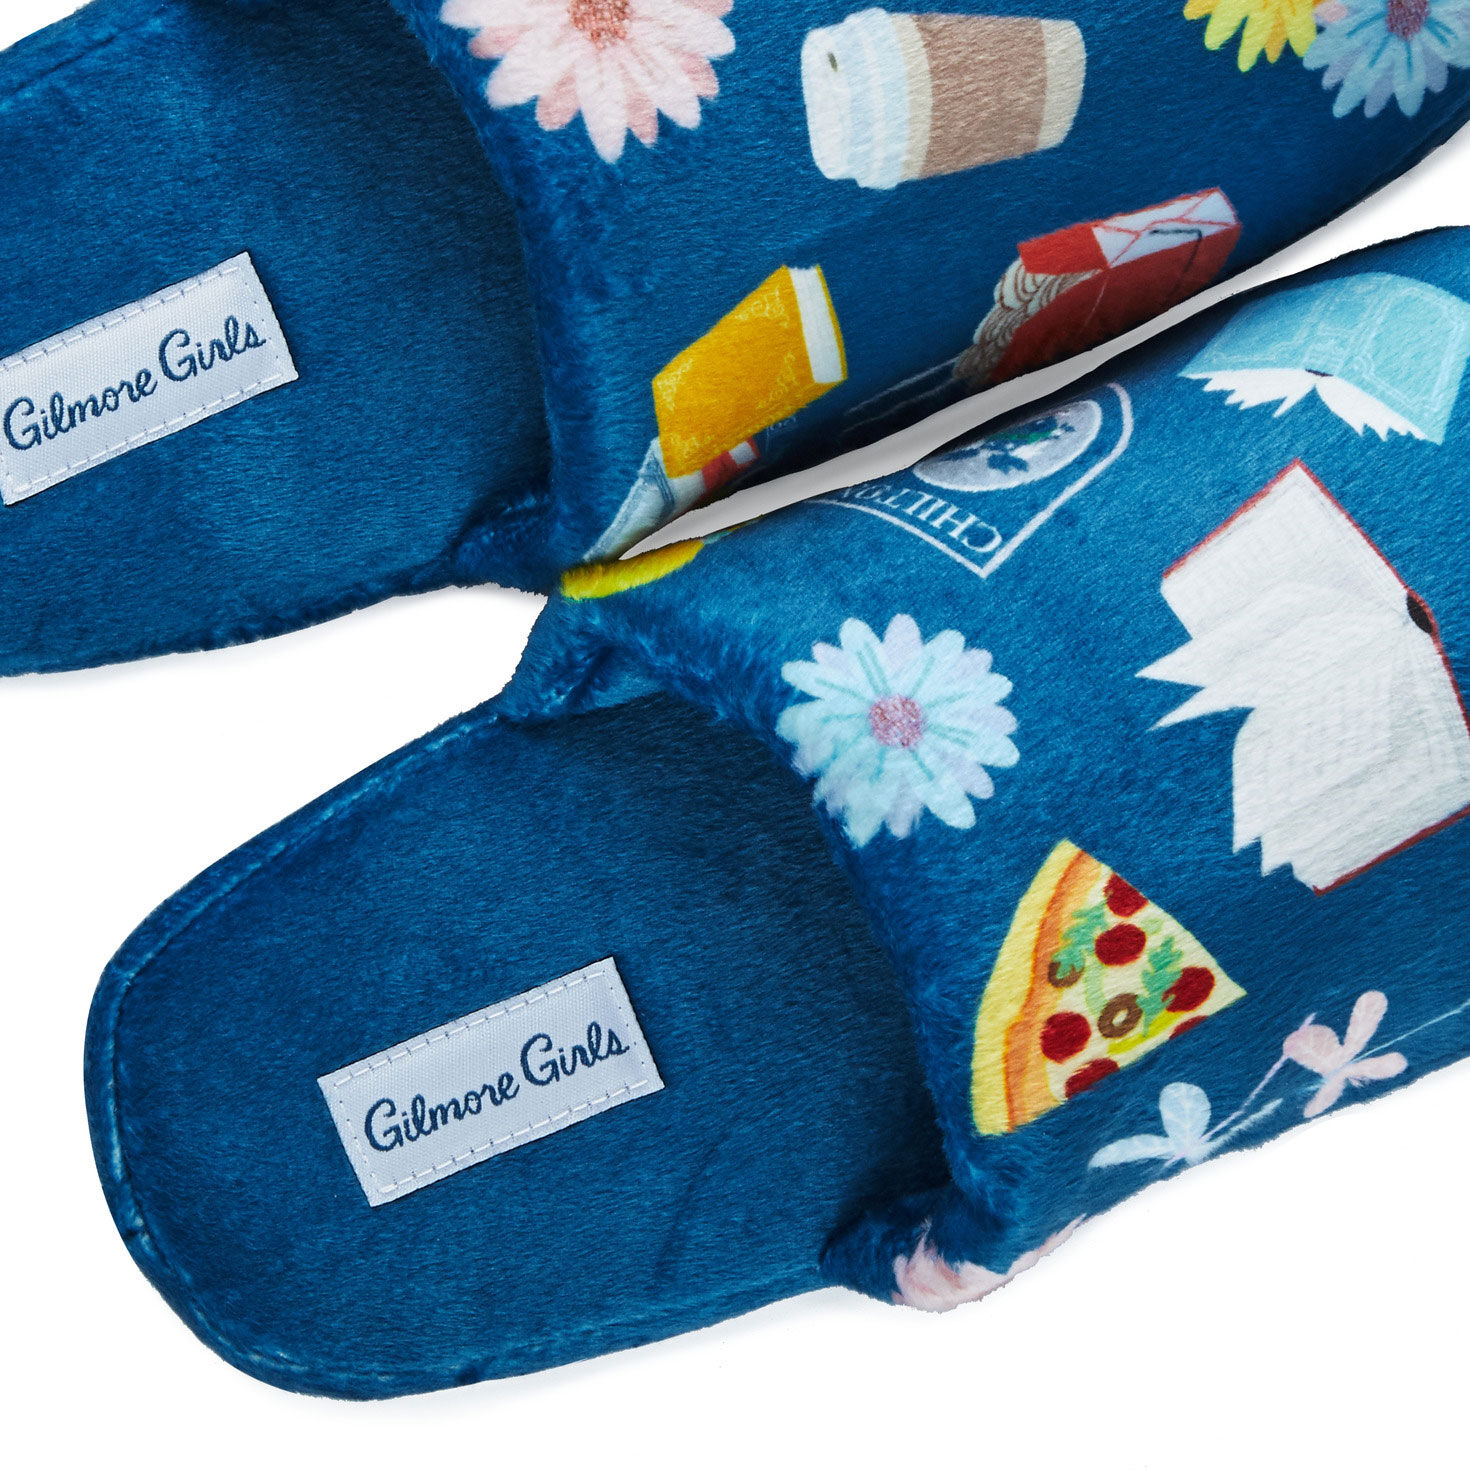 Gilmore Girls Slippers With Sound for only USD 26.99 | Hallmark